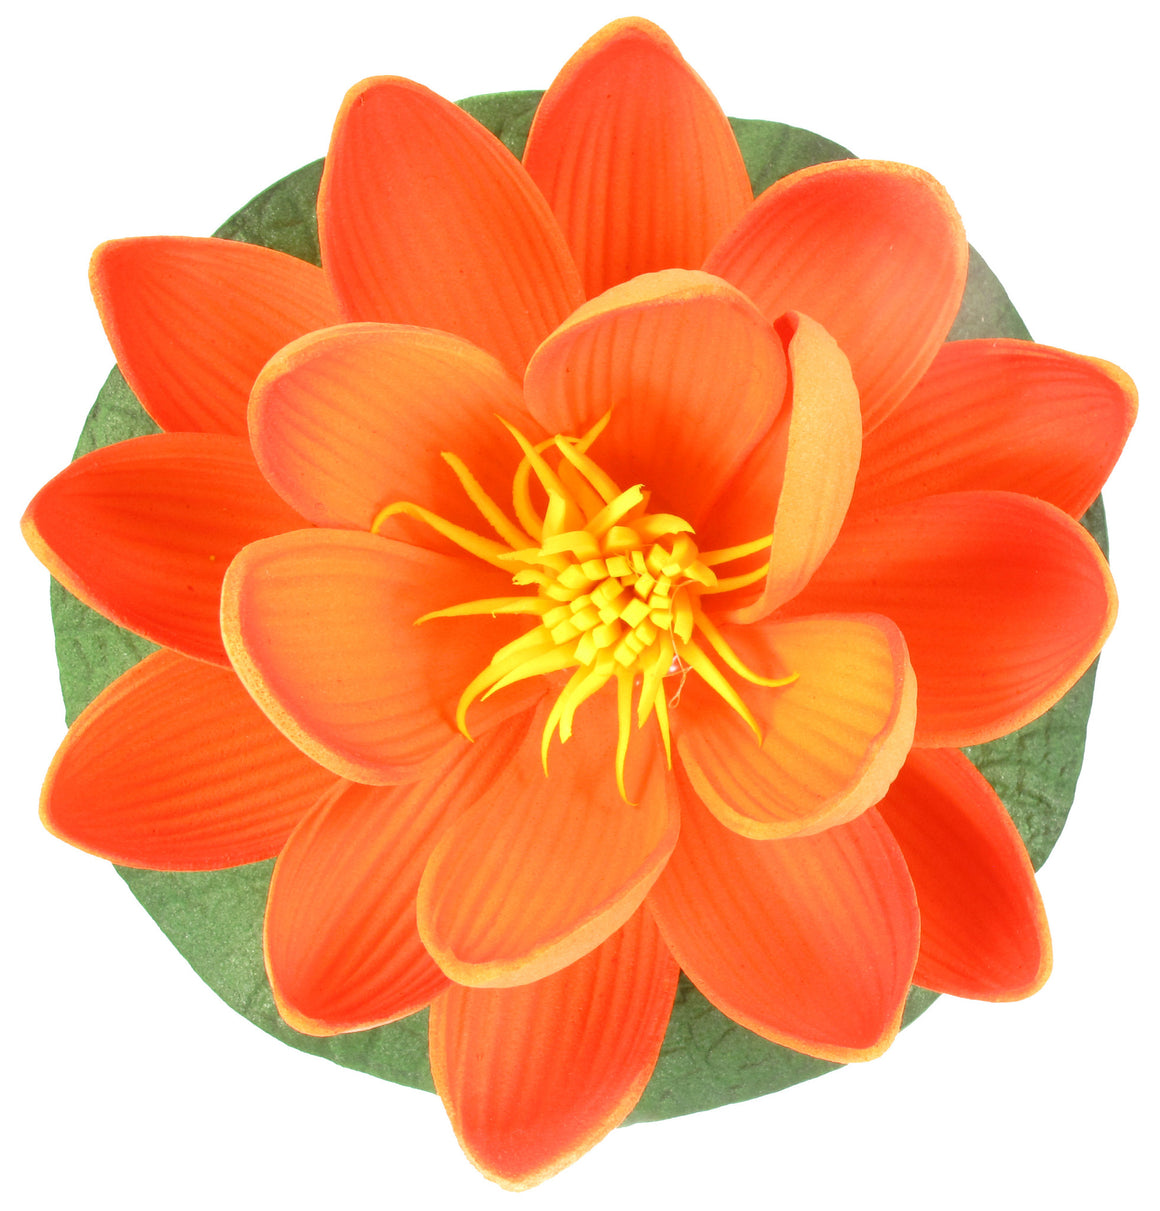 Small Floating Foam Water Lily Flower, For Small Water Feature, Approx. 3.25" x 3.5" x 2", Dark Orange - TropicaZona